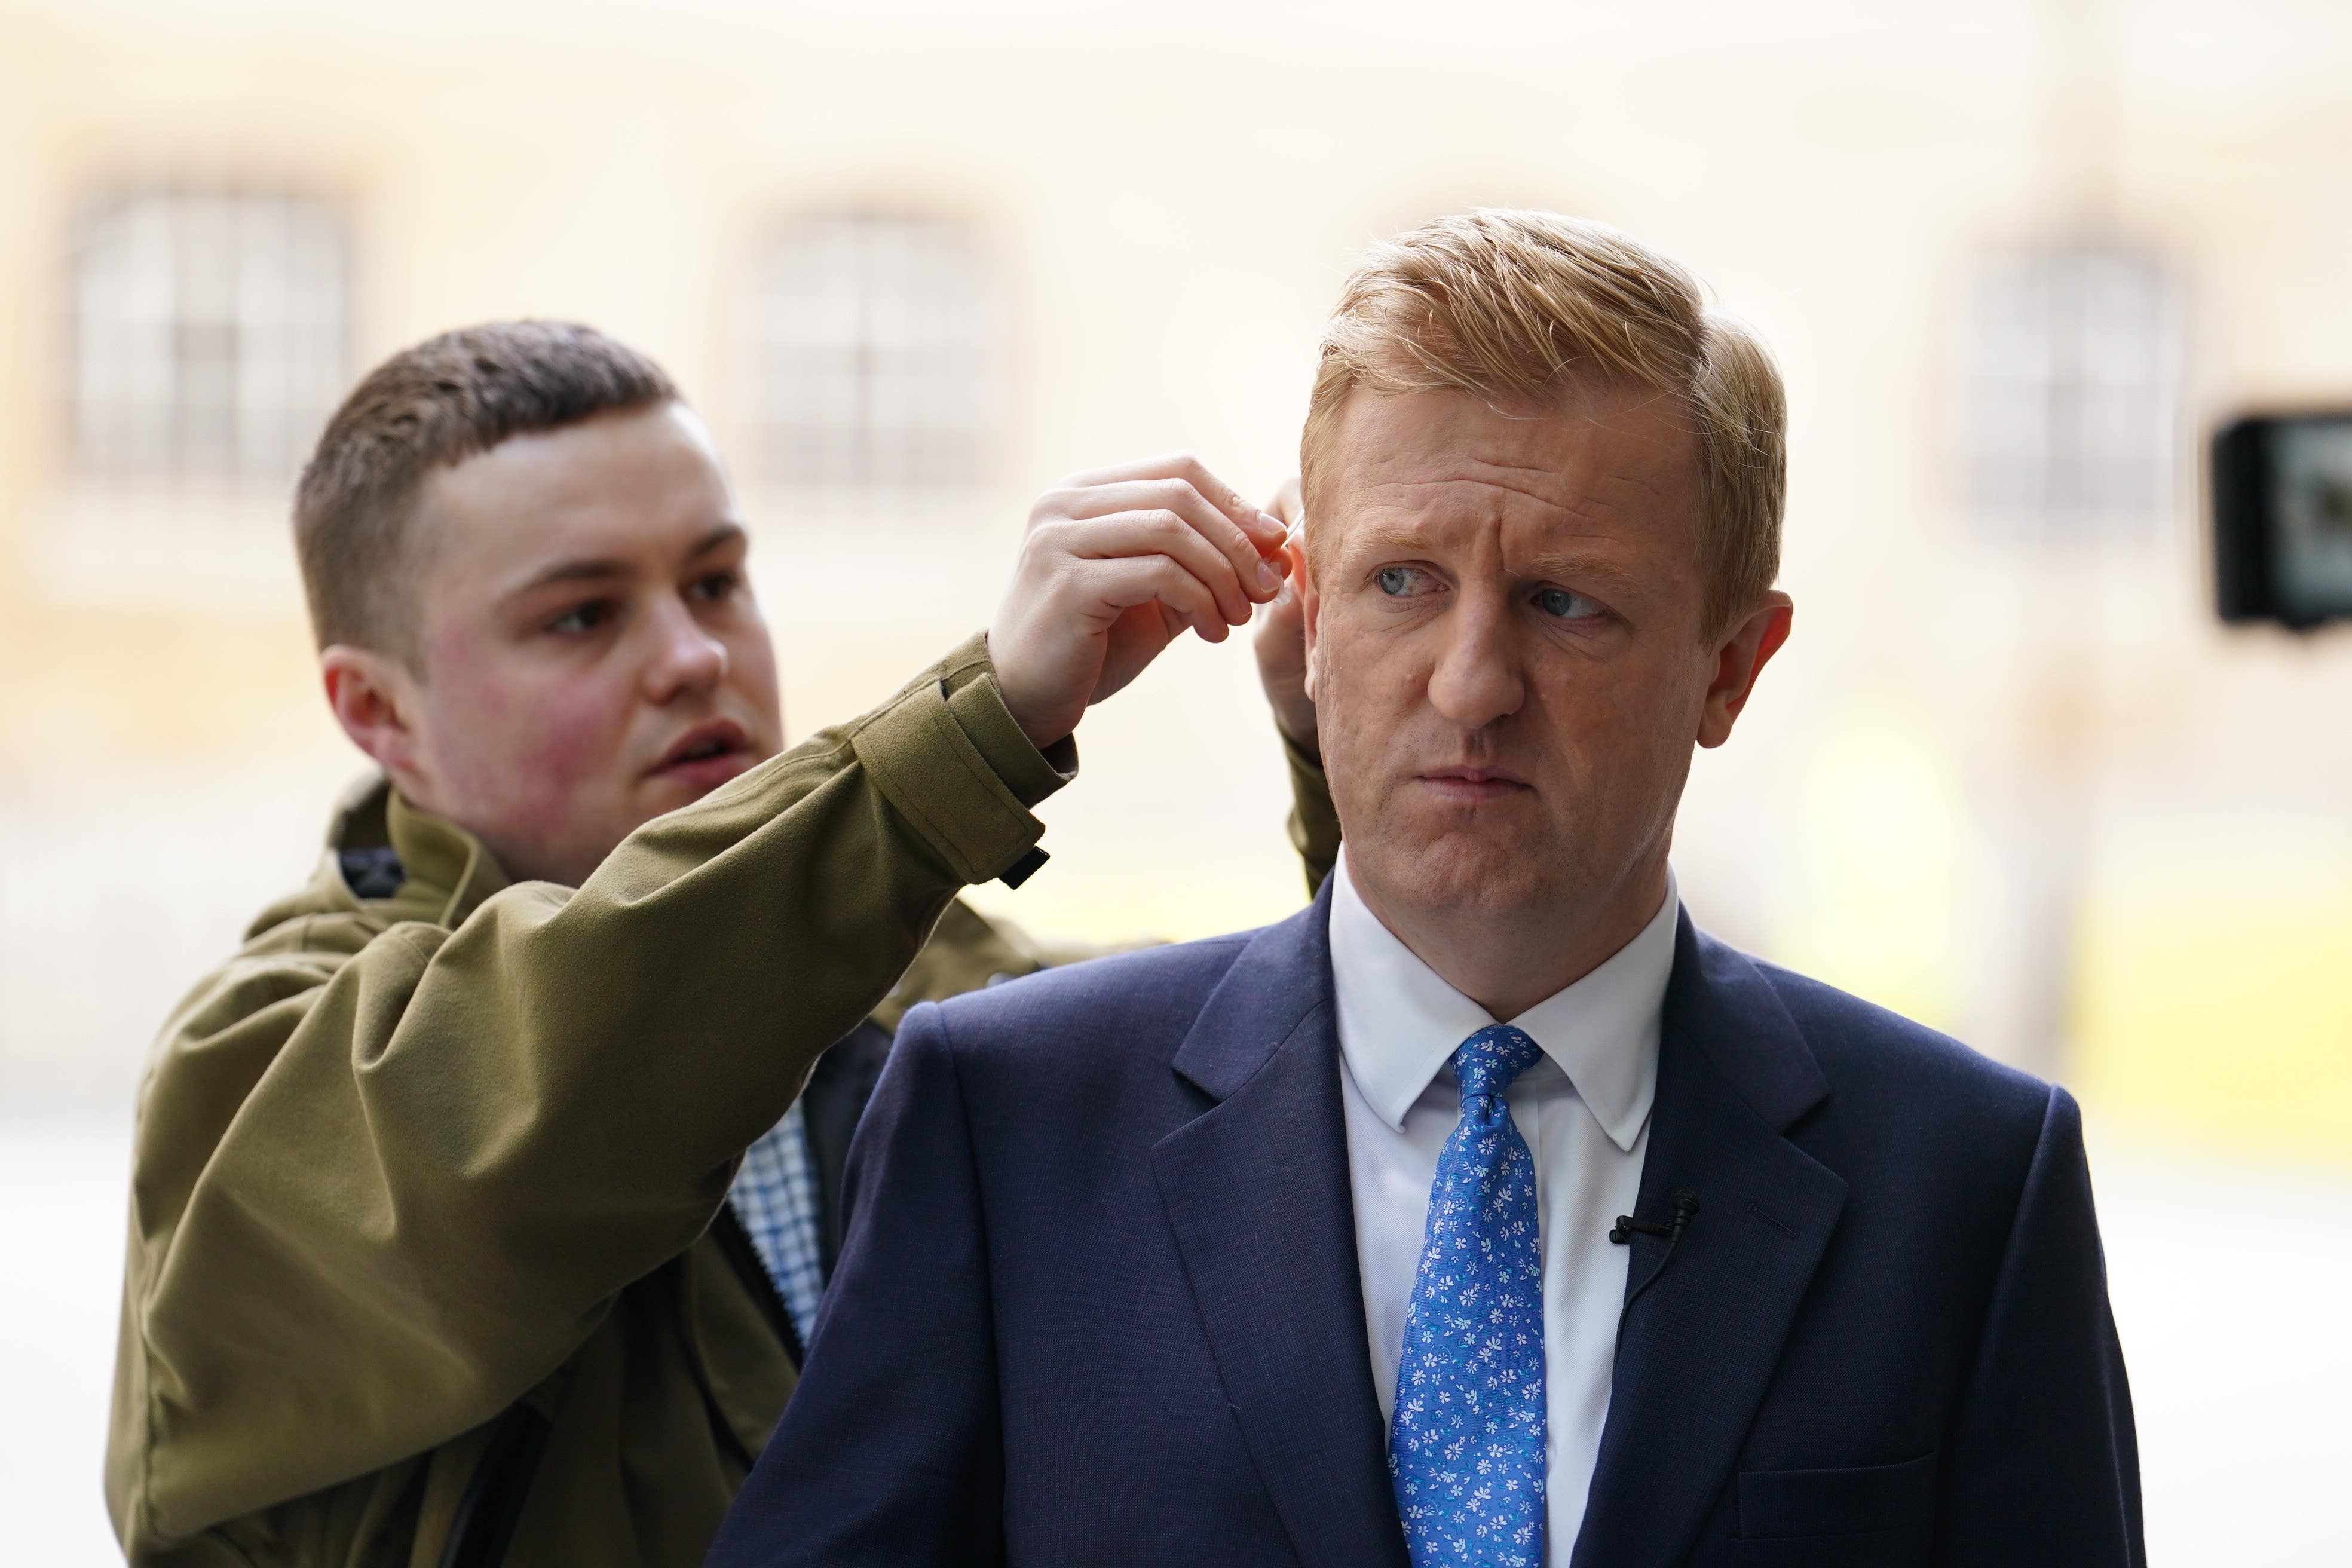 Deputy PM Oliver Dowden said there will ‘almost certainly’ be an election this year, leaving the door open to a January 2025 contest